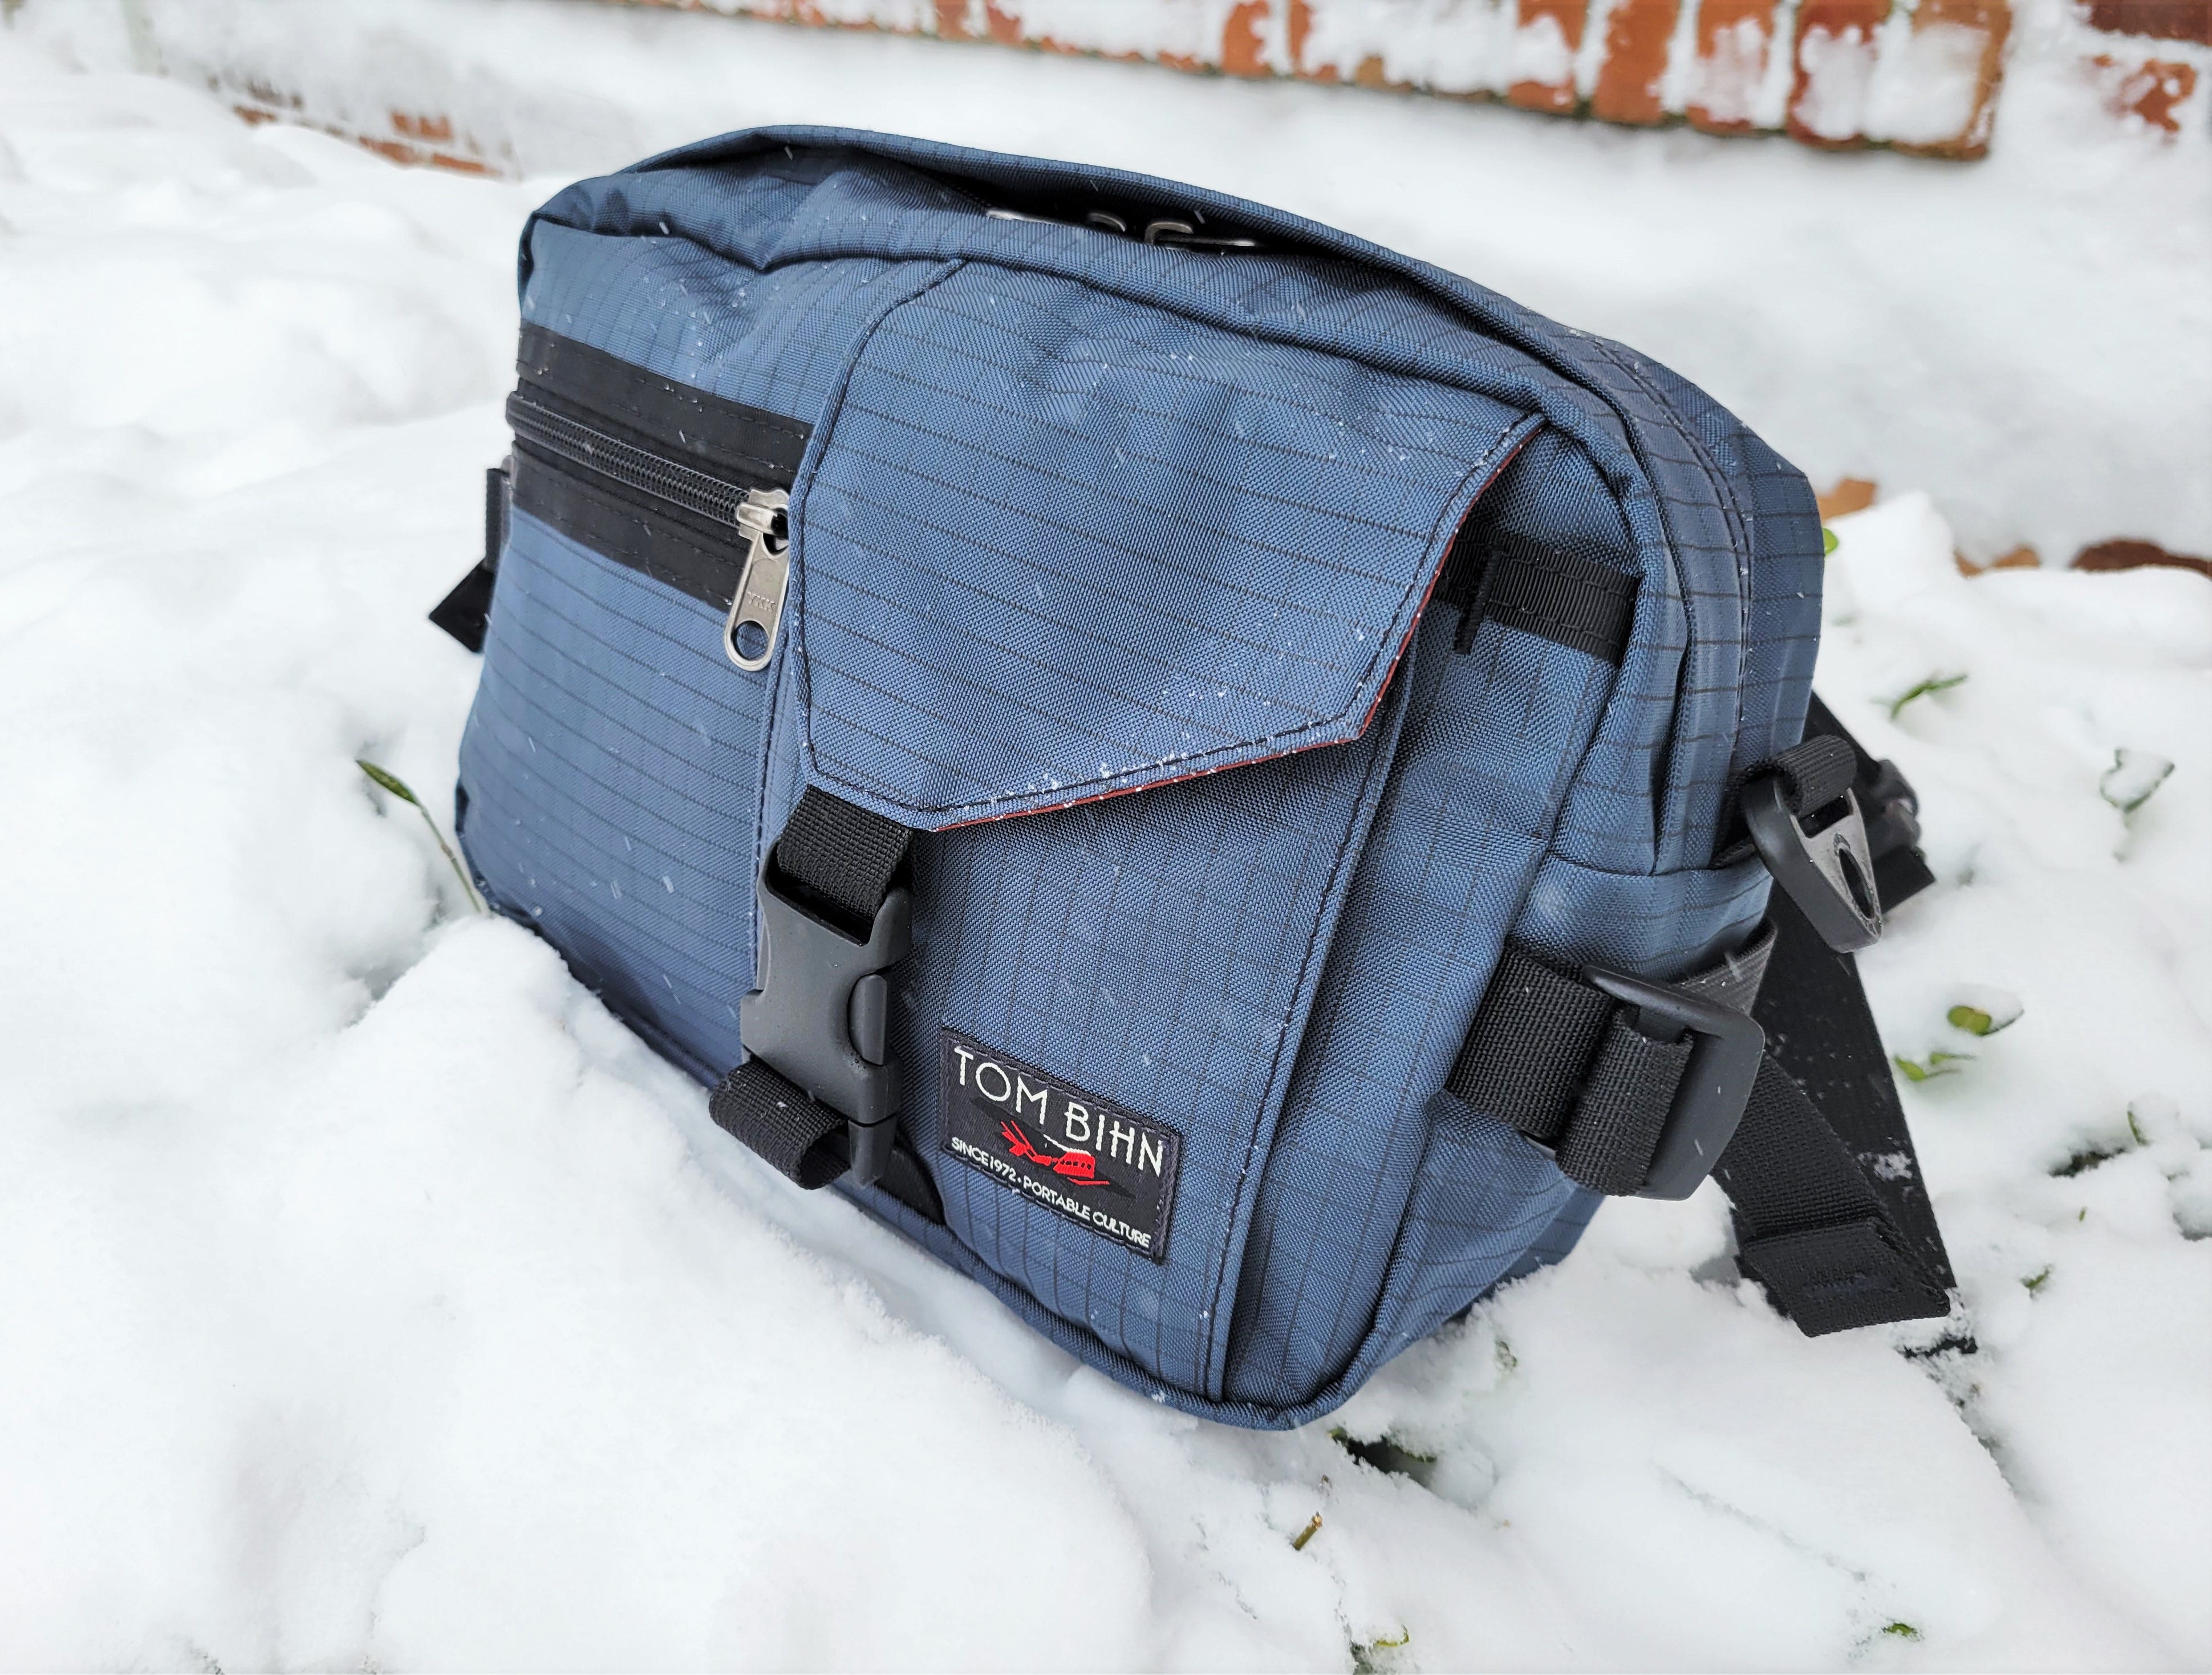 Easy ways to deal with dangly straps - TOM BIHN Forums